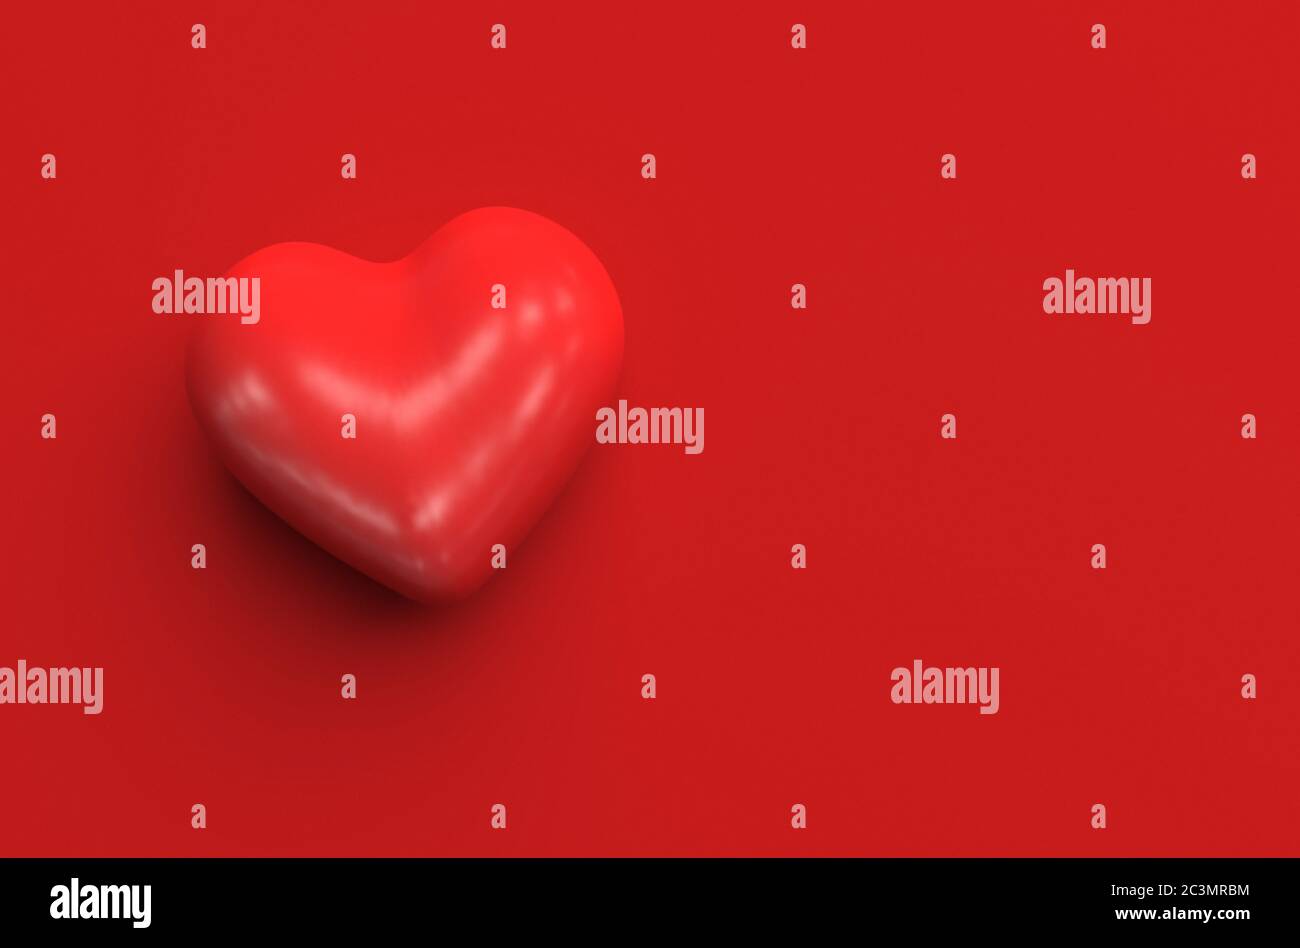 Single red heart shape on a red background. Top view. Monochrome illustration with copy space. 3D render Stock Photo